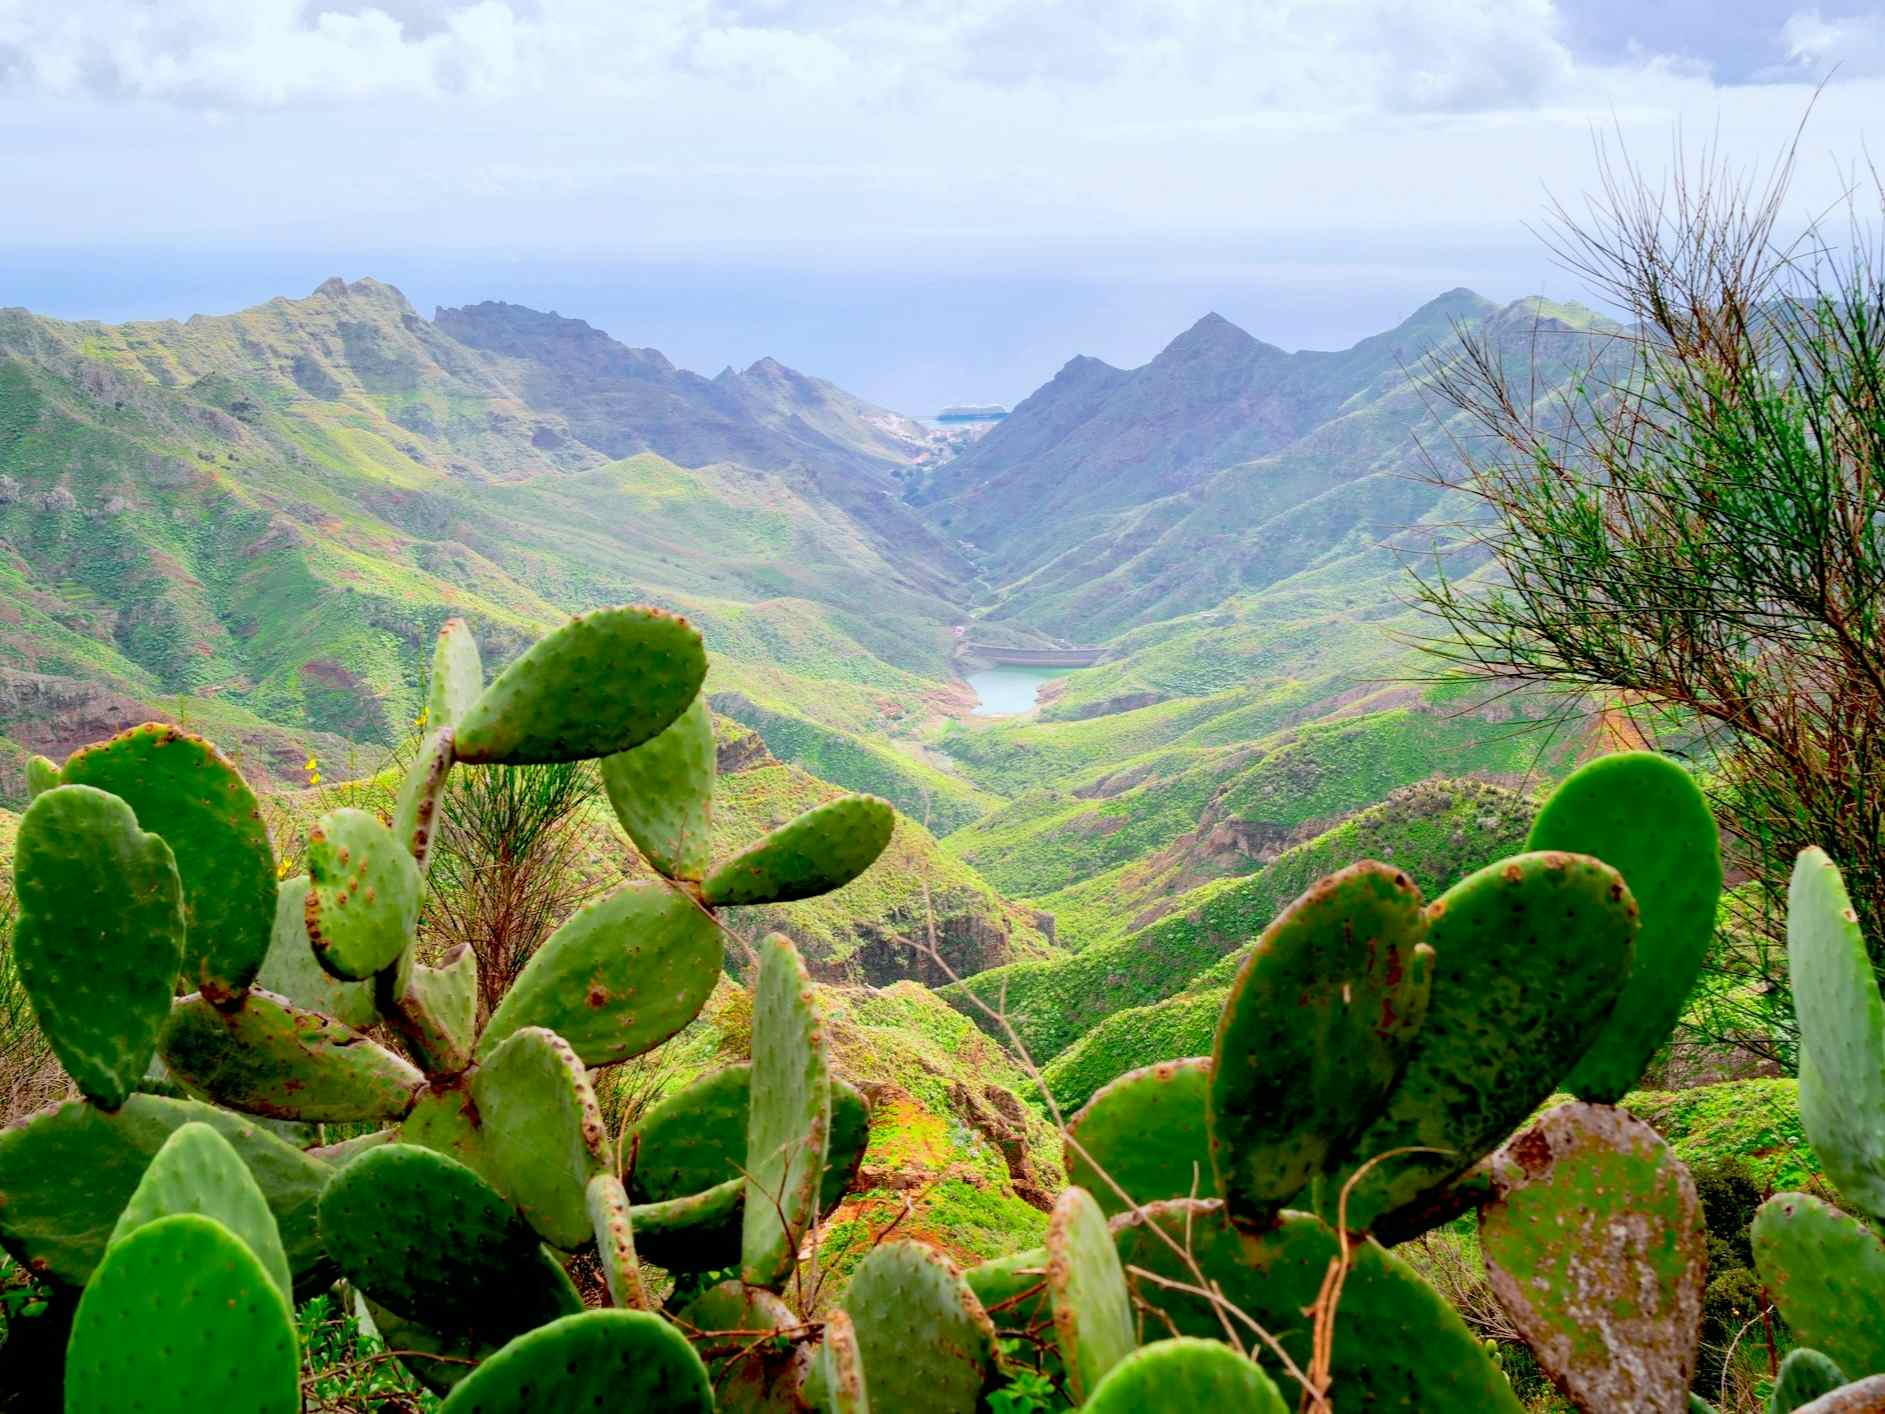 Wild nature of Anaga relict forest, Tenerife, Spain 